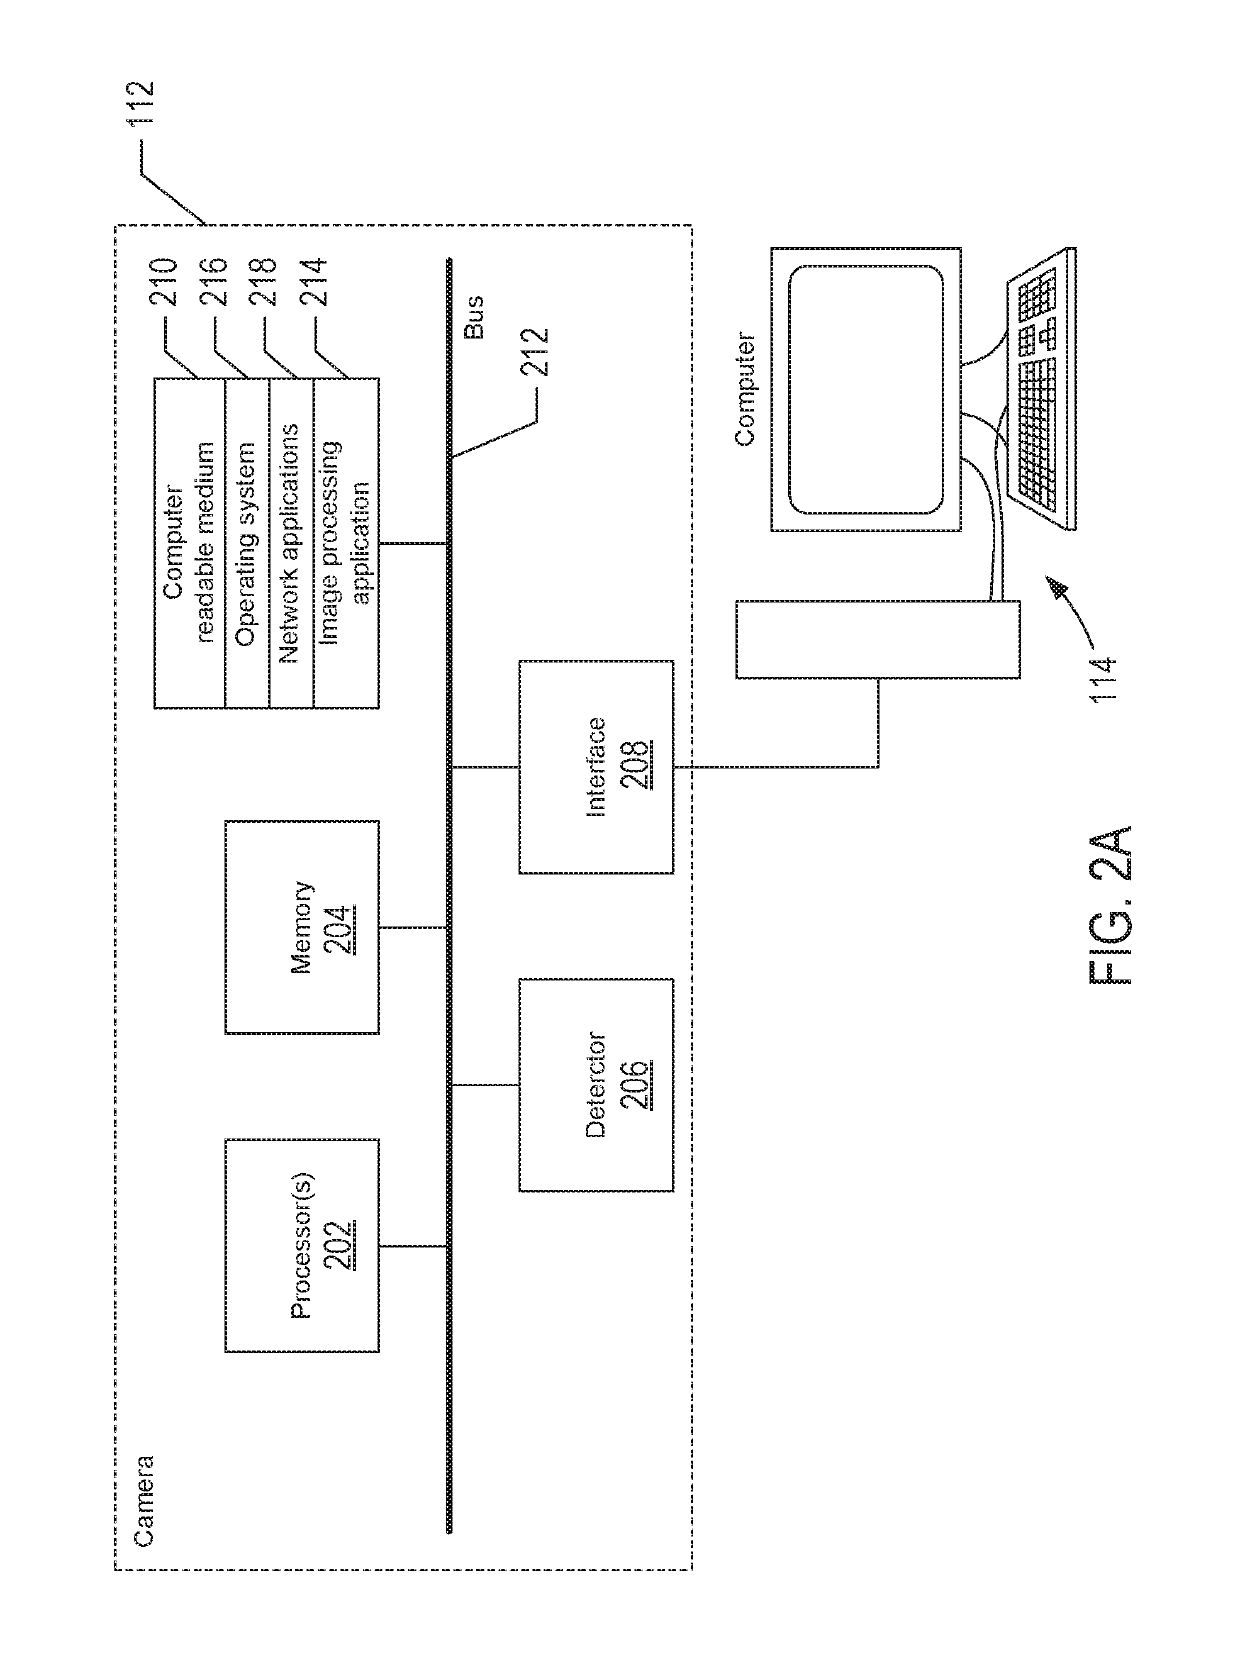 Systems and methods for camera-based image processing in microscopy instruments